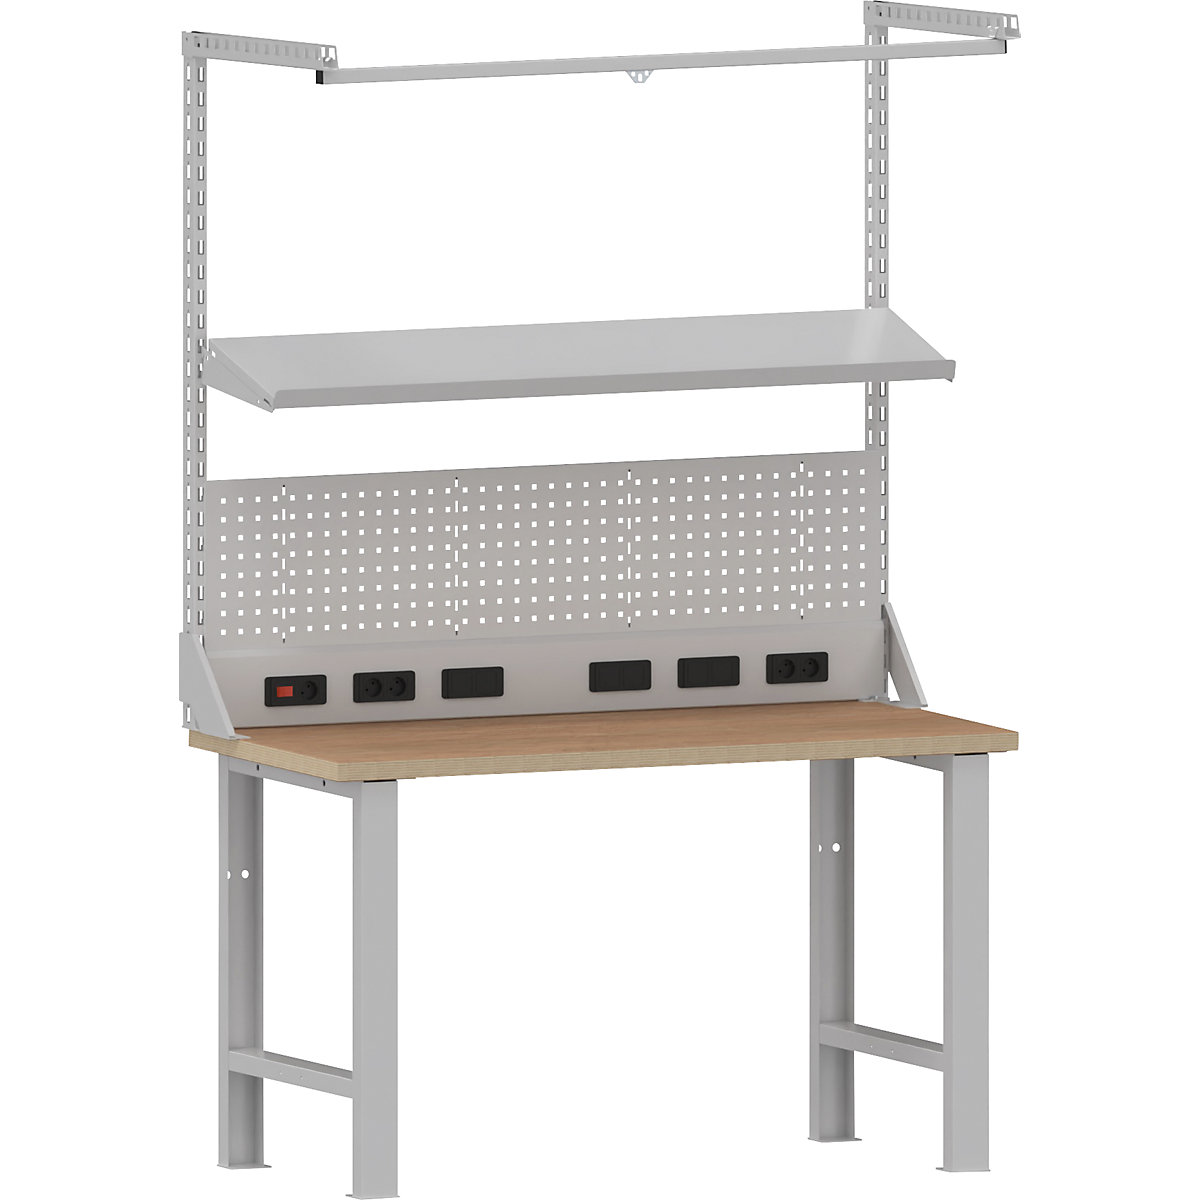 Multifunctional add-on module for workbench – LISTA, with perforated panel, equipment rail, adjustable shelf and rear power panel, width 1500 mm